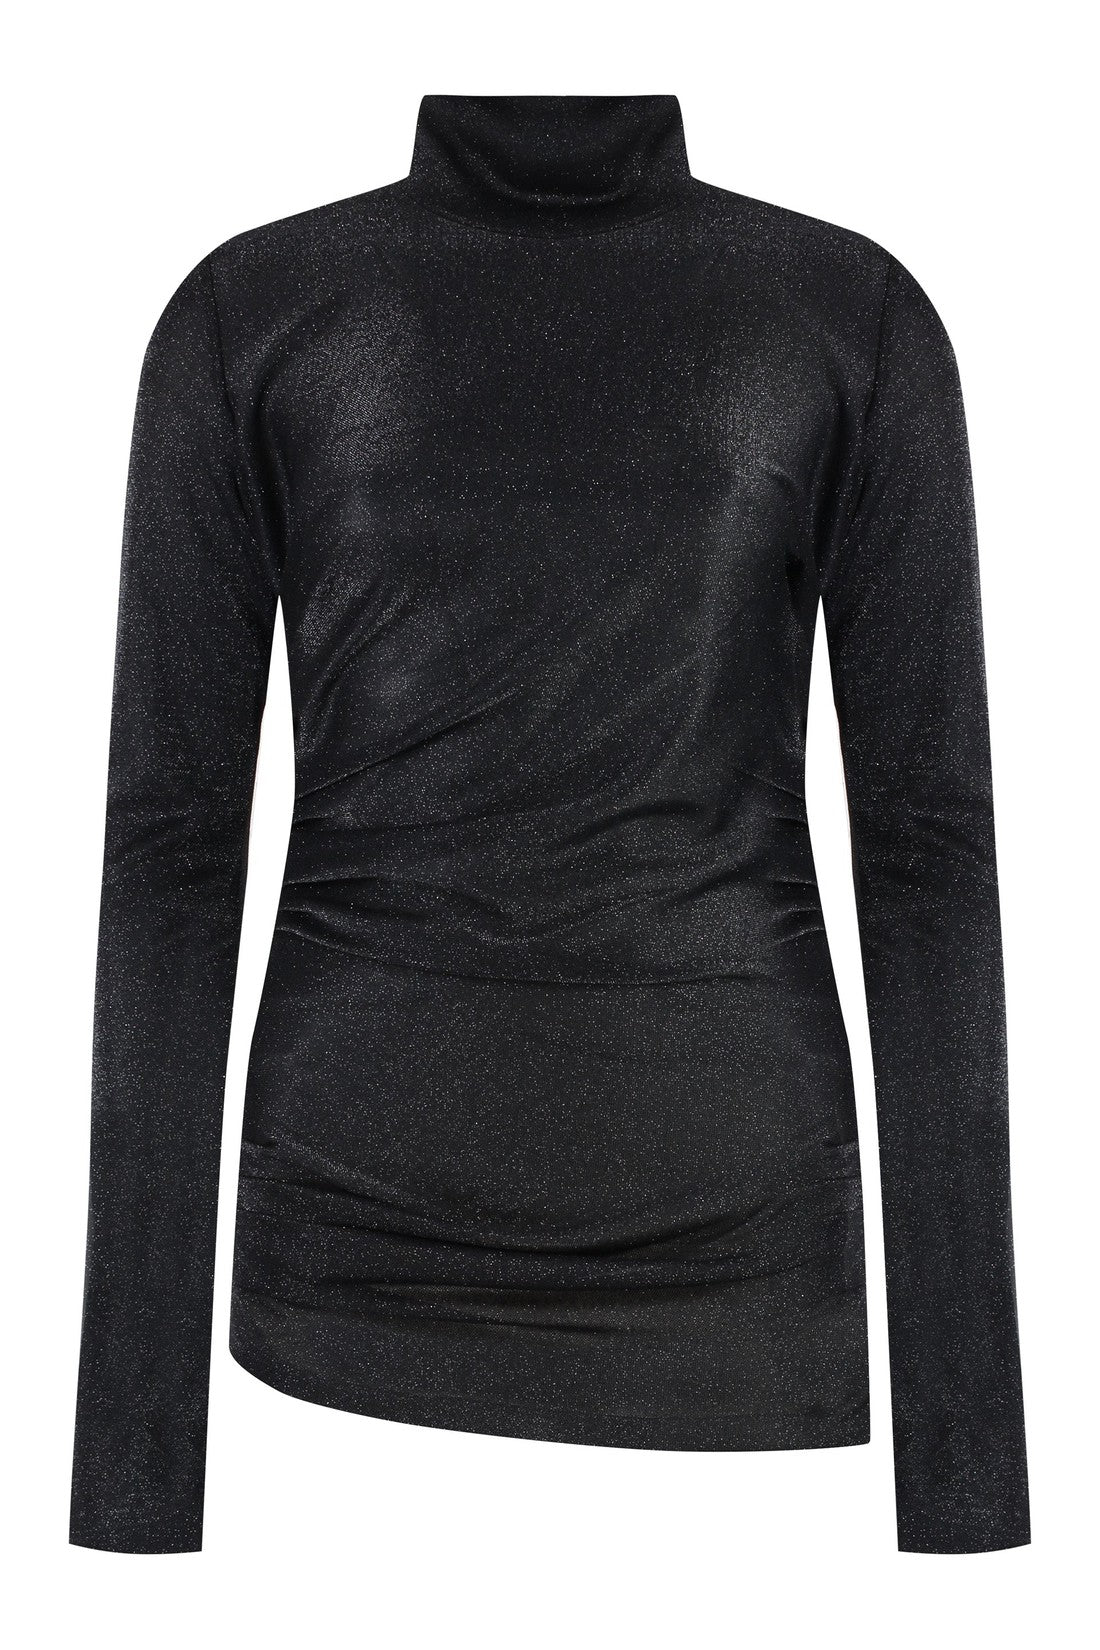 MSGM-OUTLET-SALE-Knitted lurex top-ARCHIVIST